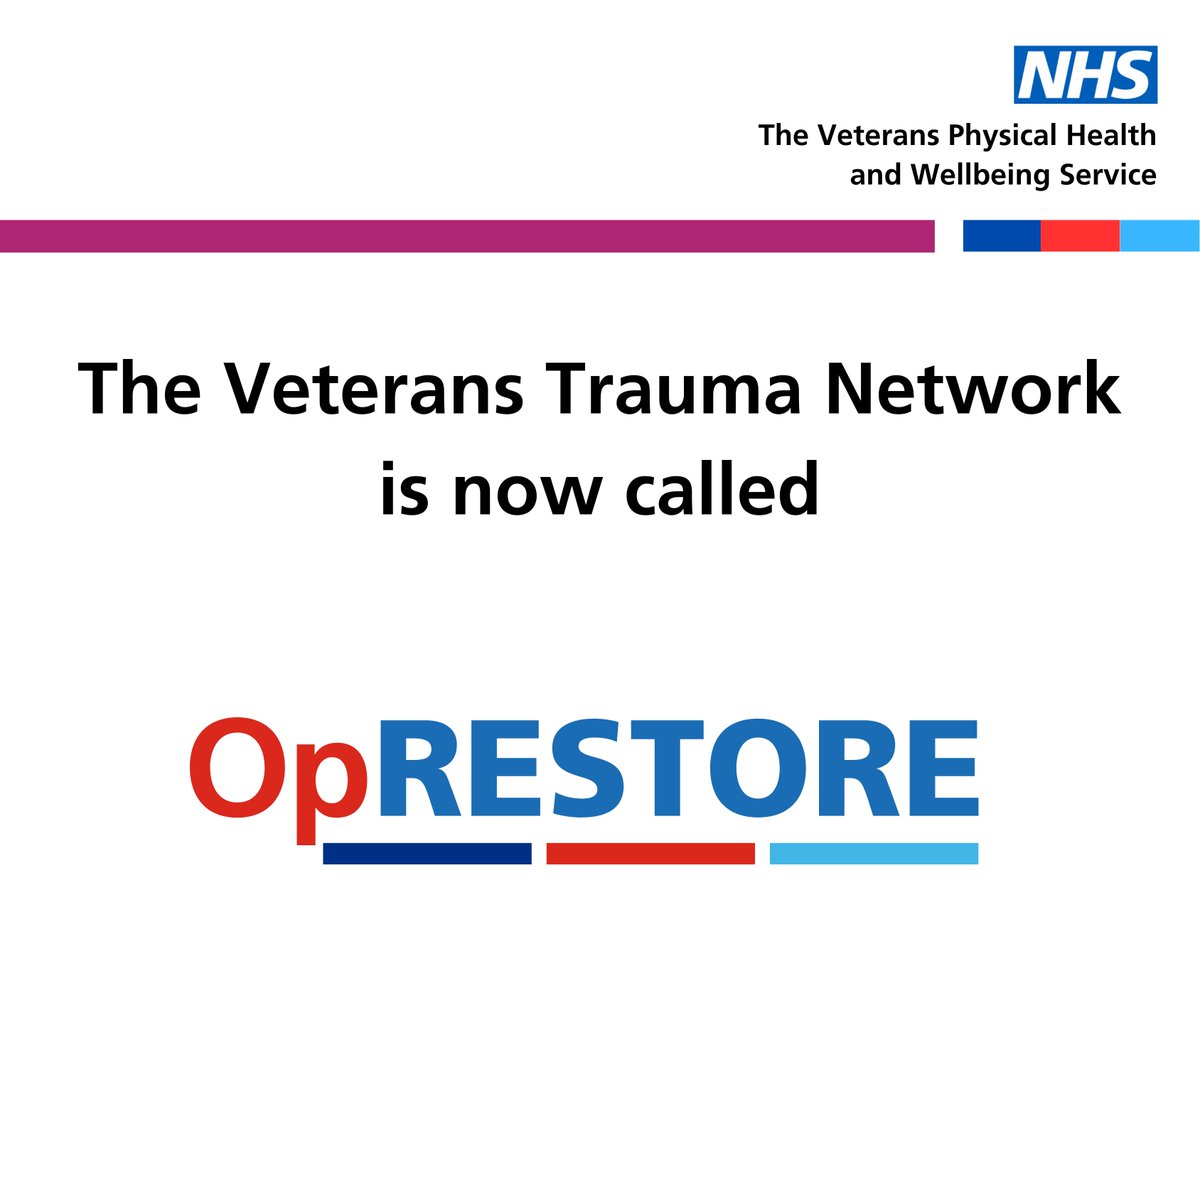 The Veterans Trauma Network has been renamed Op RESTORE: The Veterans Physical Health and Wellbeing Service. If you have served in the UK Armed Forces and have a physical illness/injury due to your Service, your GP can refer you. @NHSEngland @ImperialNHS #OpRestore #Veteran #NHS